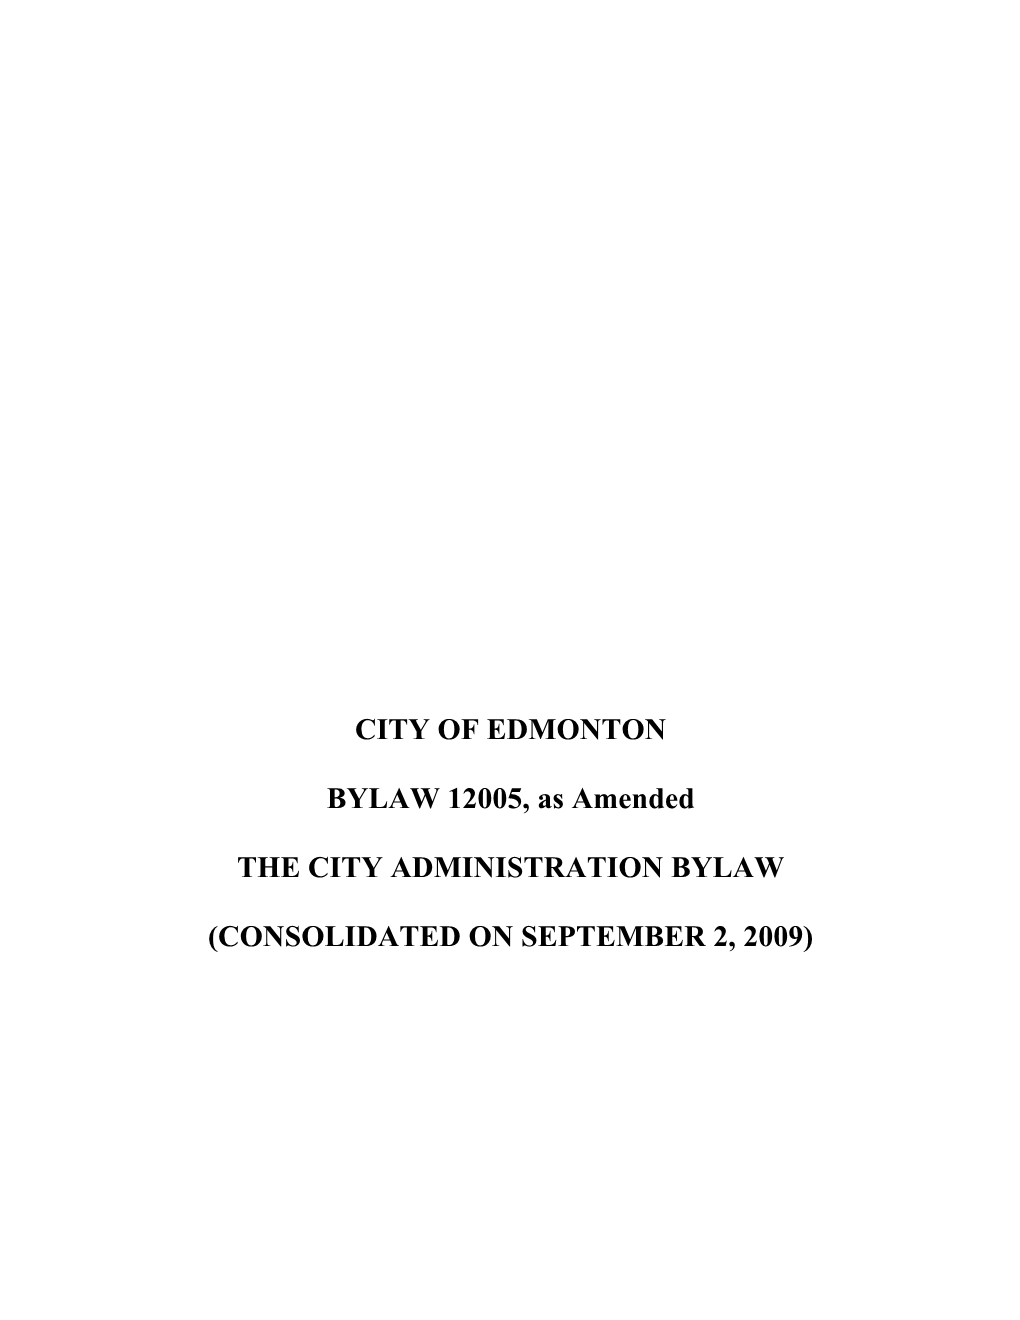 The City Administration Bylaw